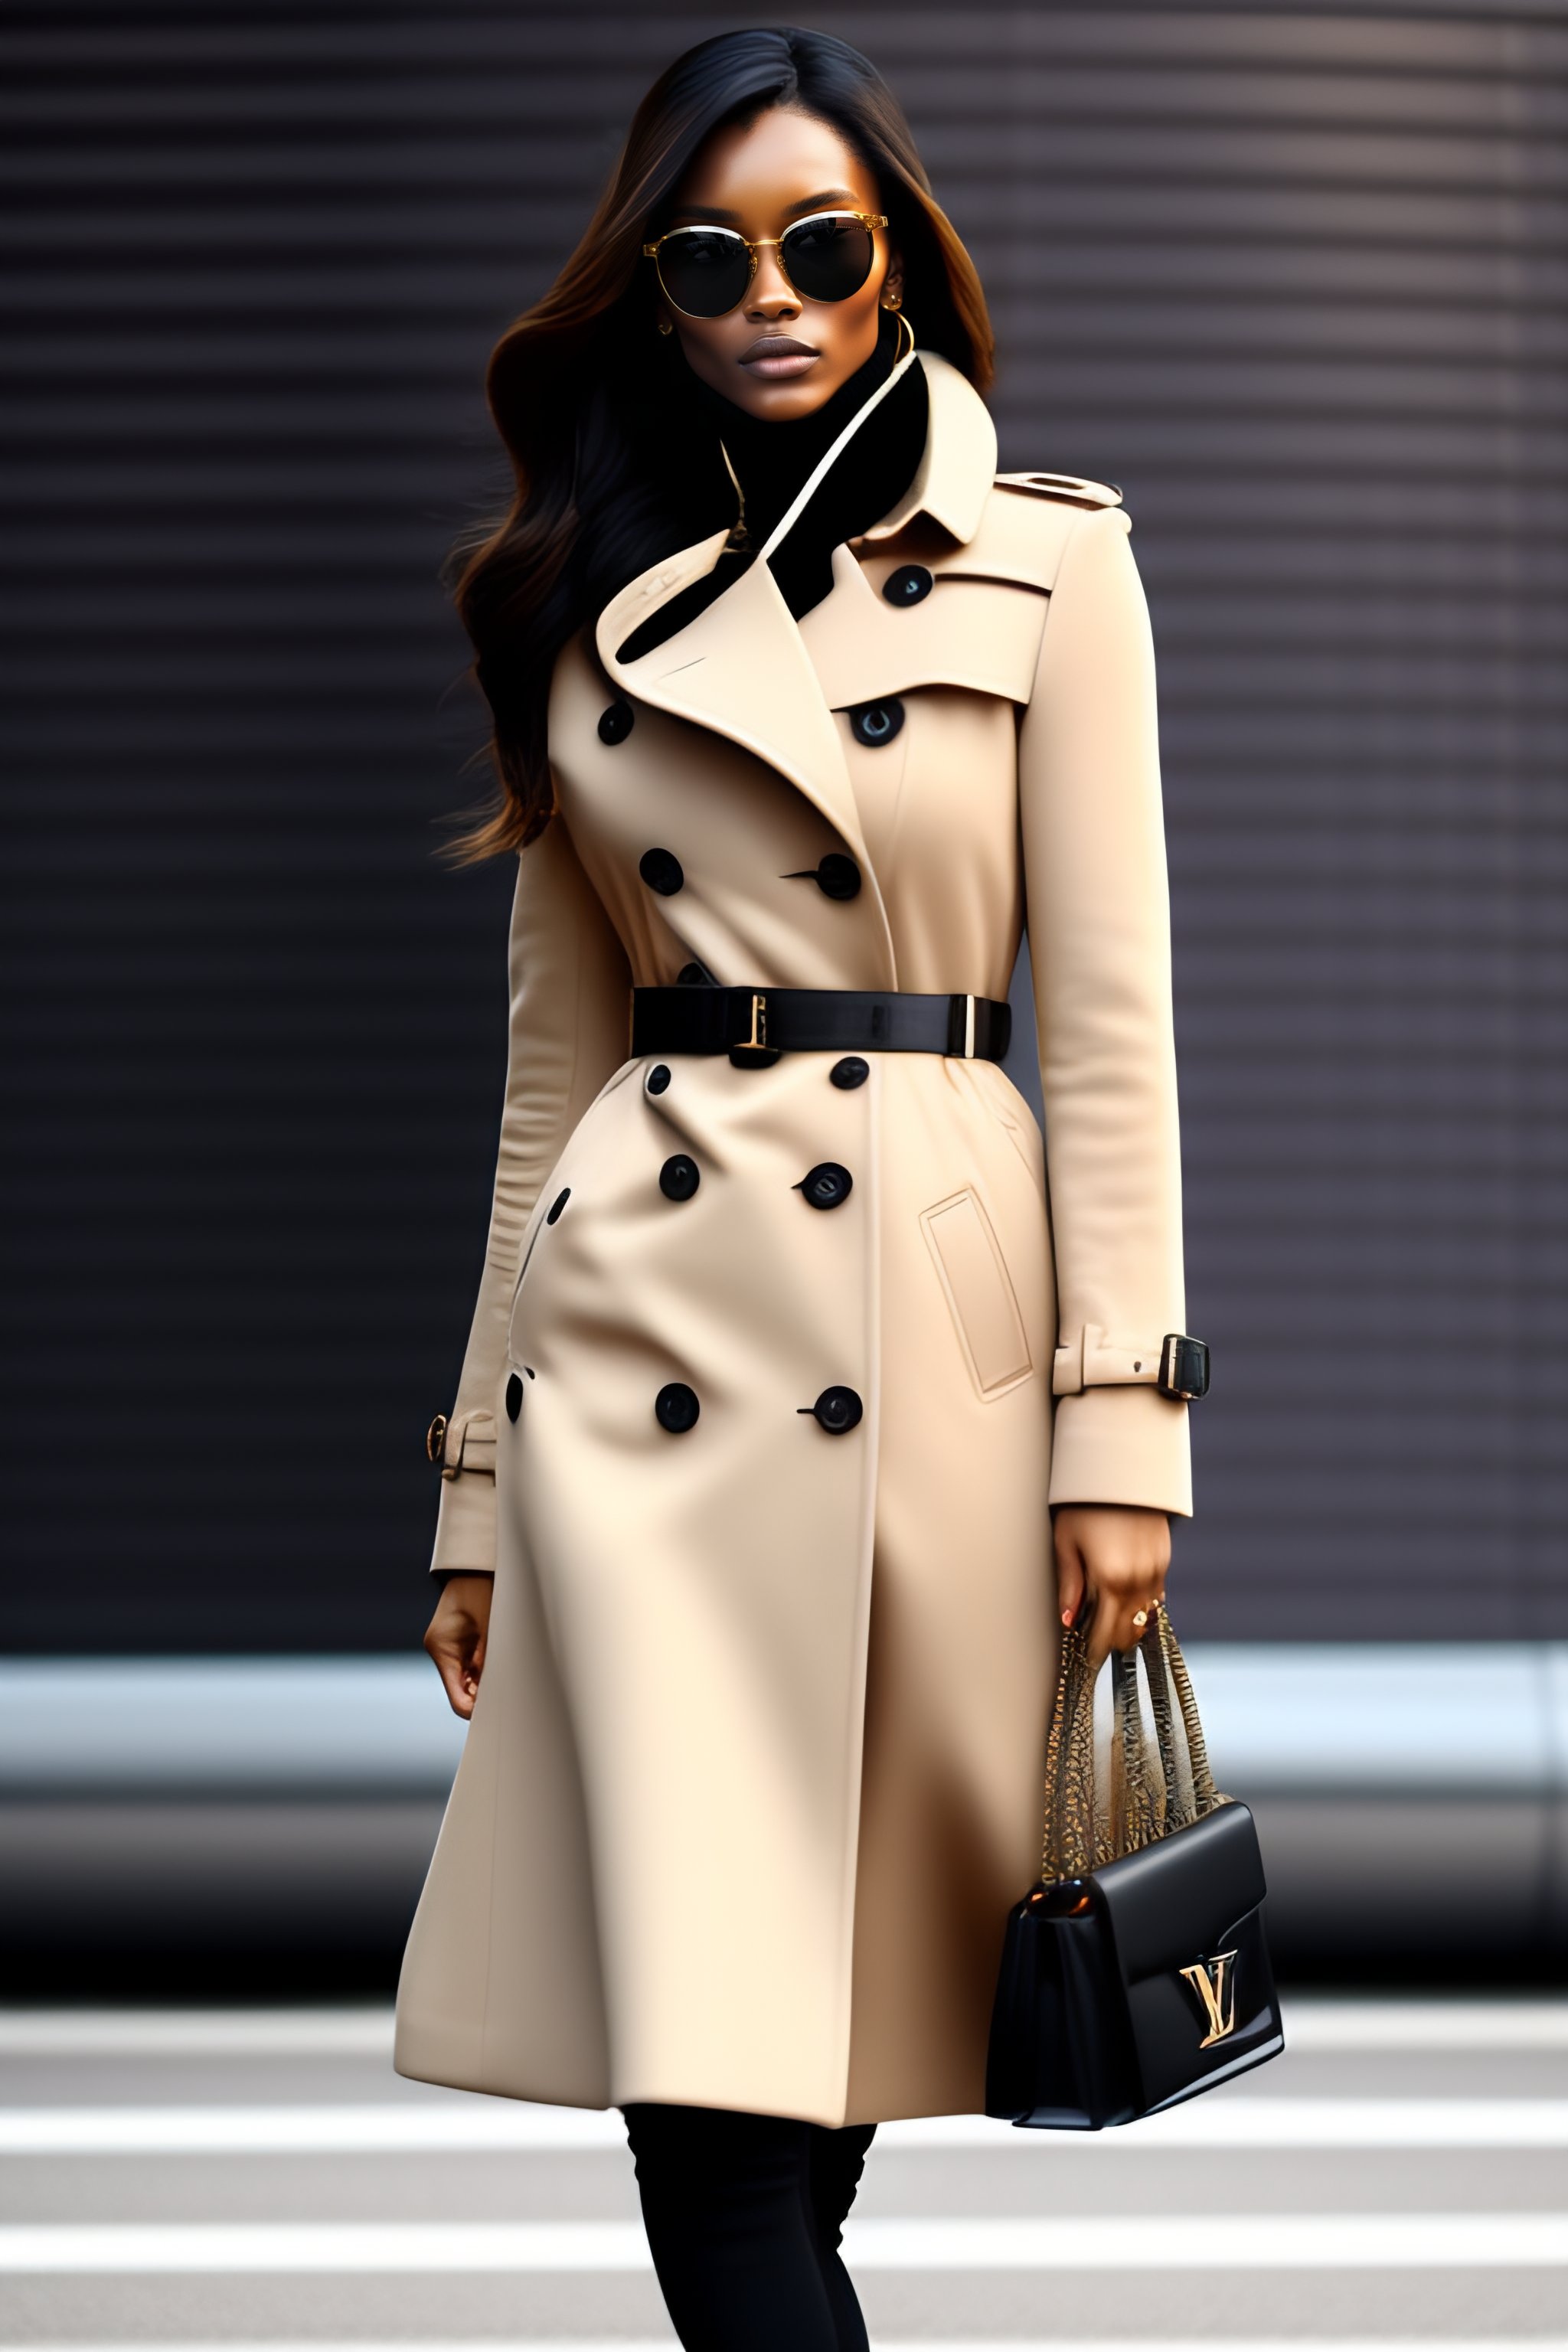 badning Forskellige Misforstå Lexica - Woman with square sunglasses wearing an open black Burberry trench  coat, from the right shoulder hangs a Louis Vuitton shopper style handba...